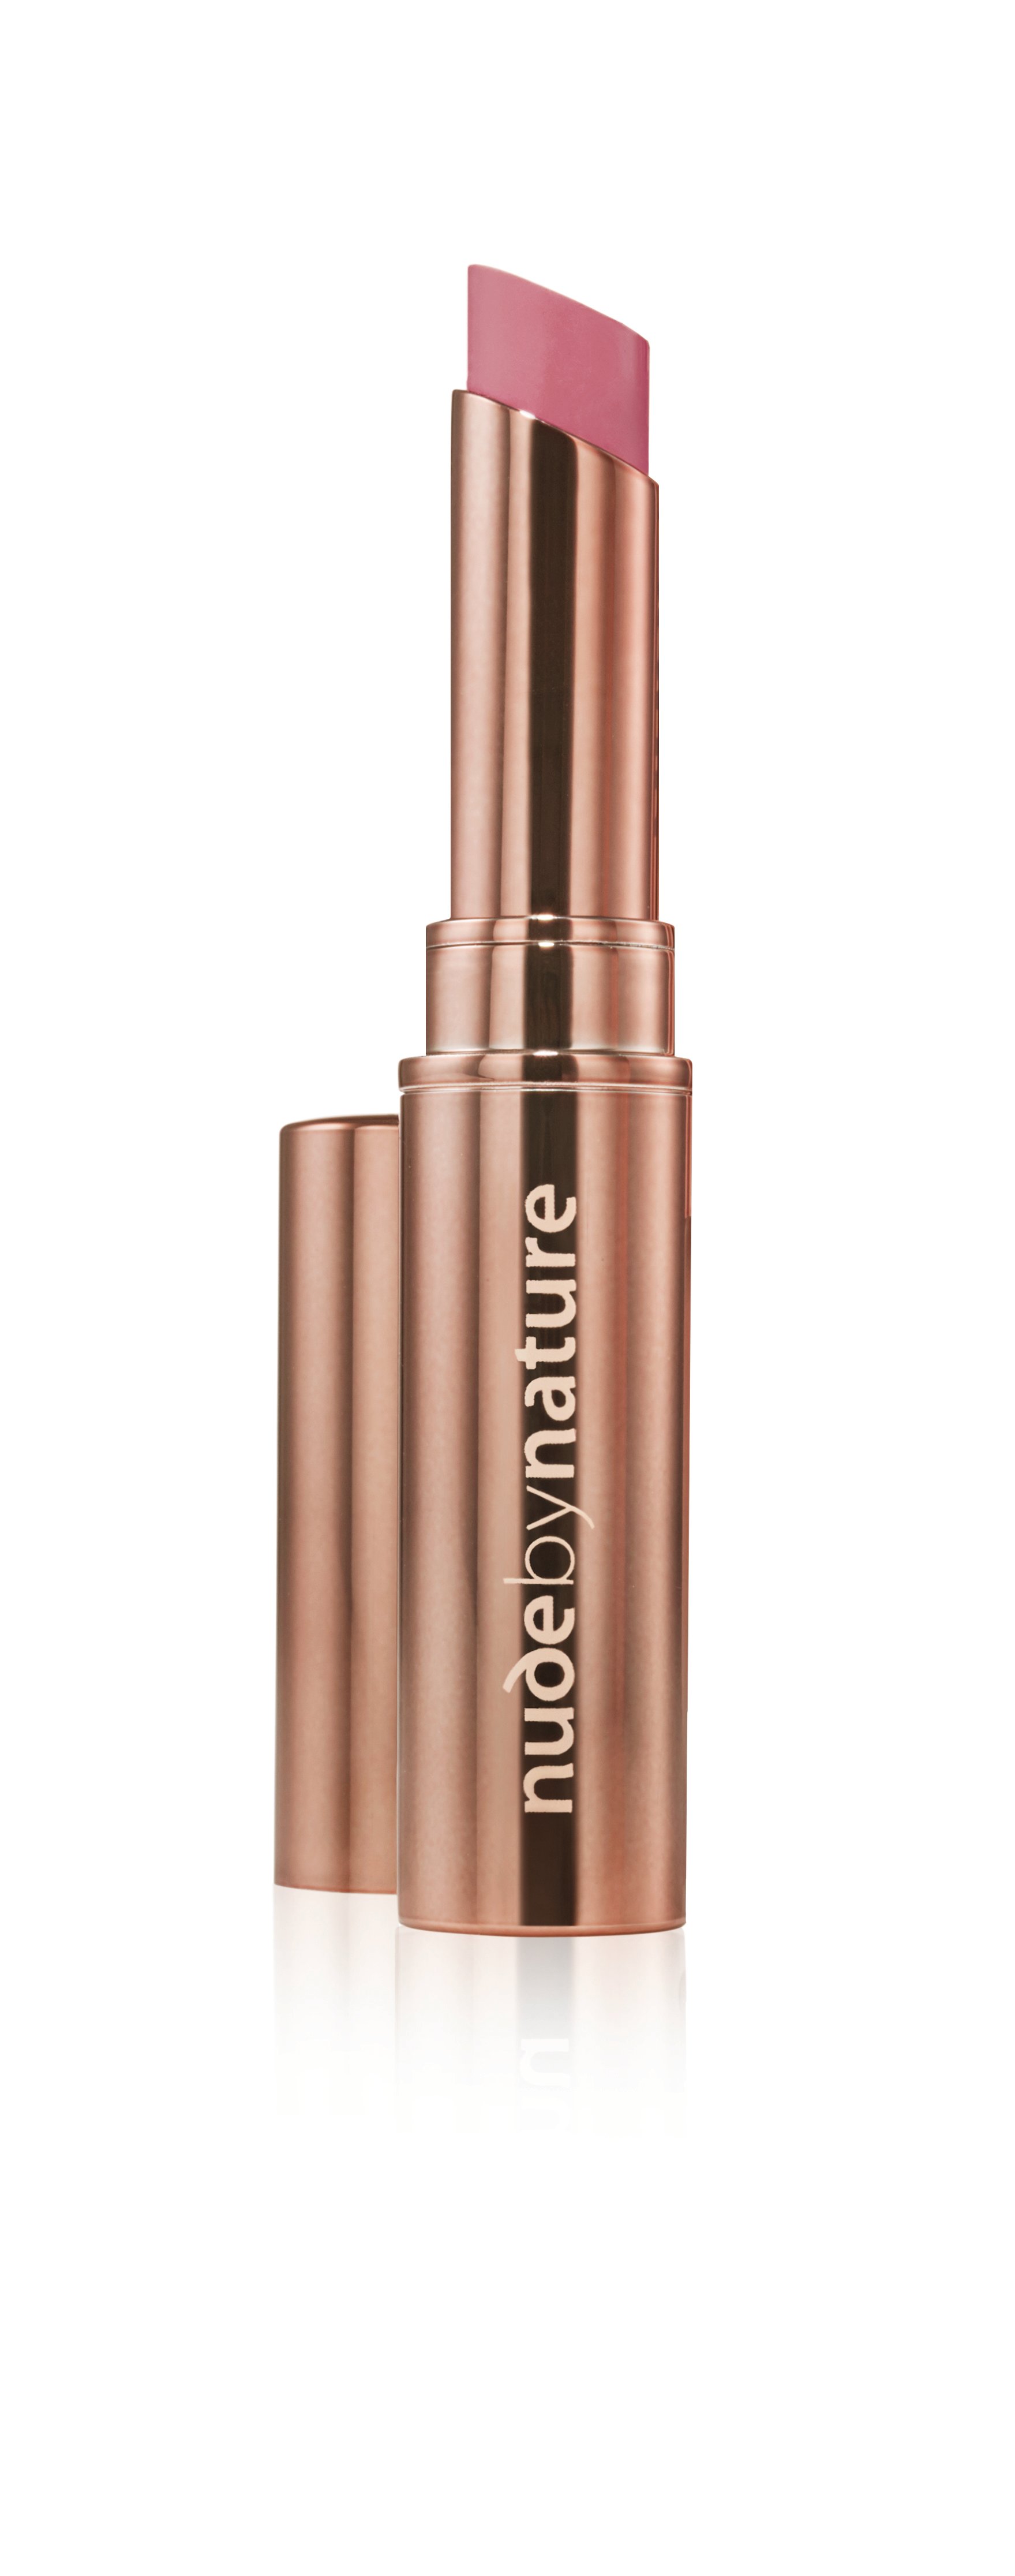 Nude by Nature - Creamy Matte Lipstick - 06 Coral Pink